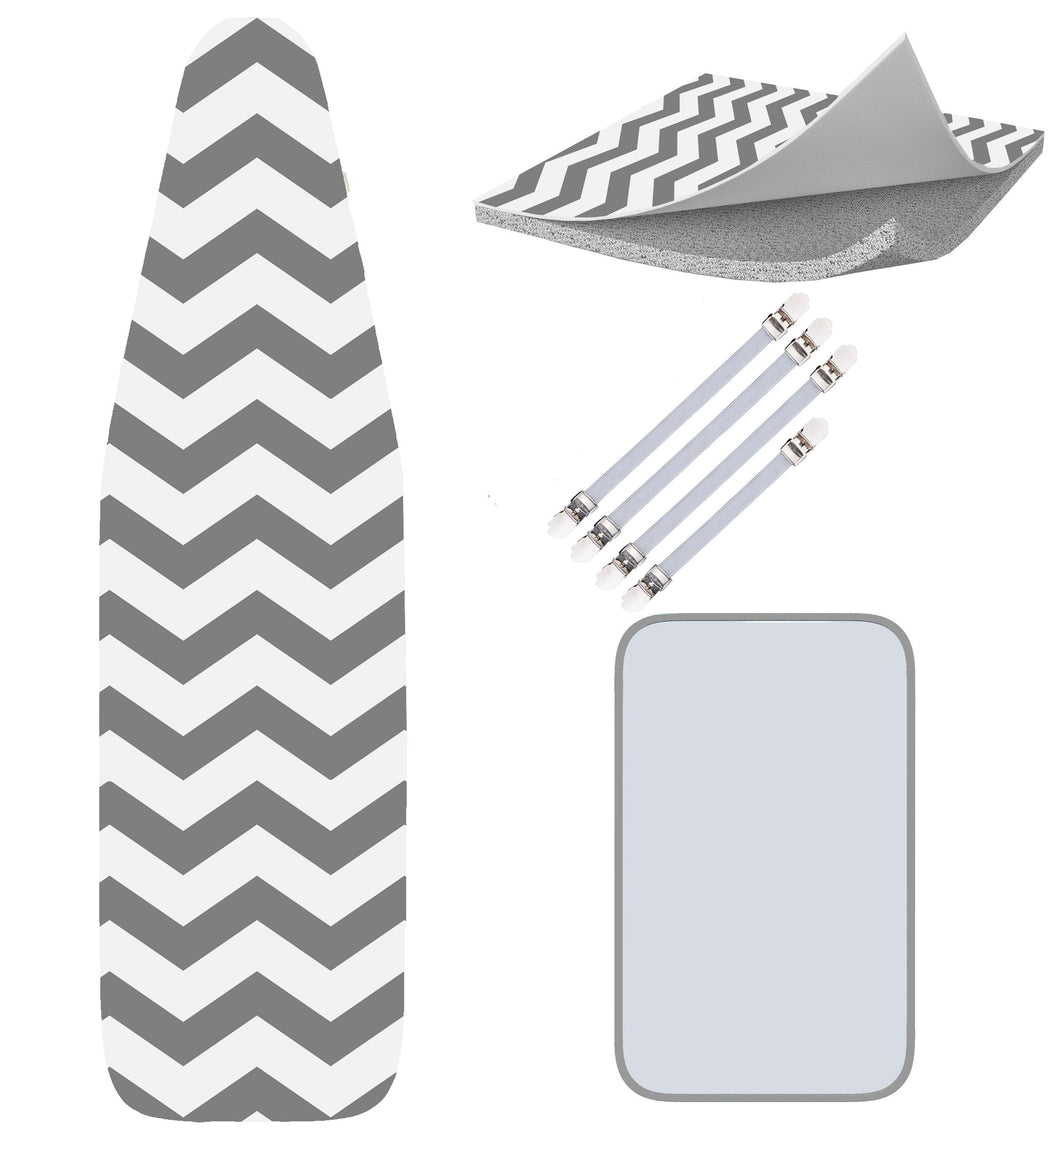 Chevron Ironing Board Cover - Scorch Proof with Bonus Adjustable Fasteners and Protective Mesh (15